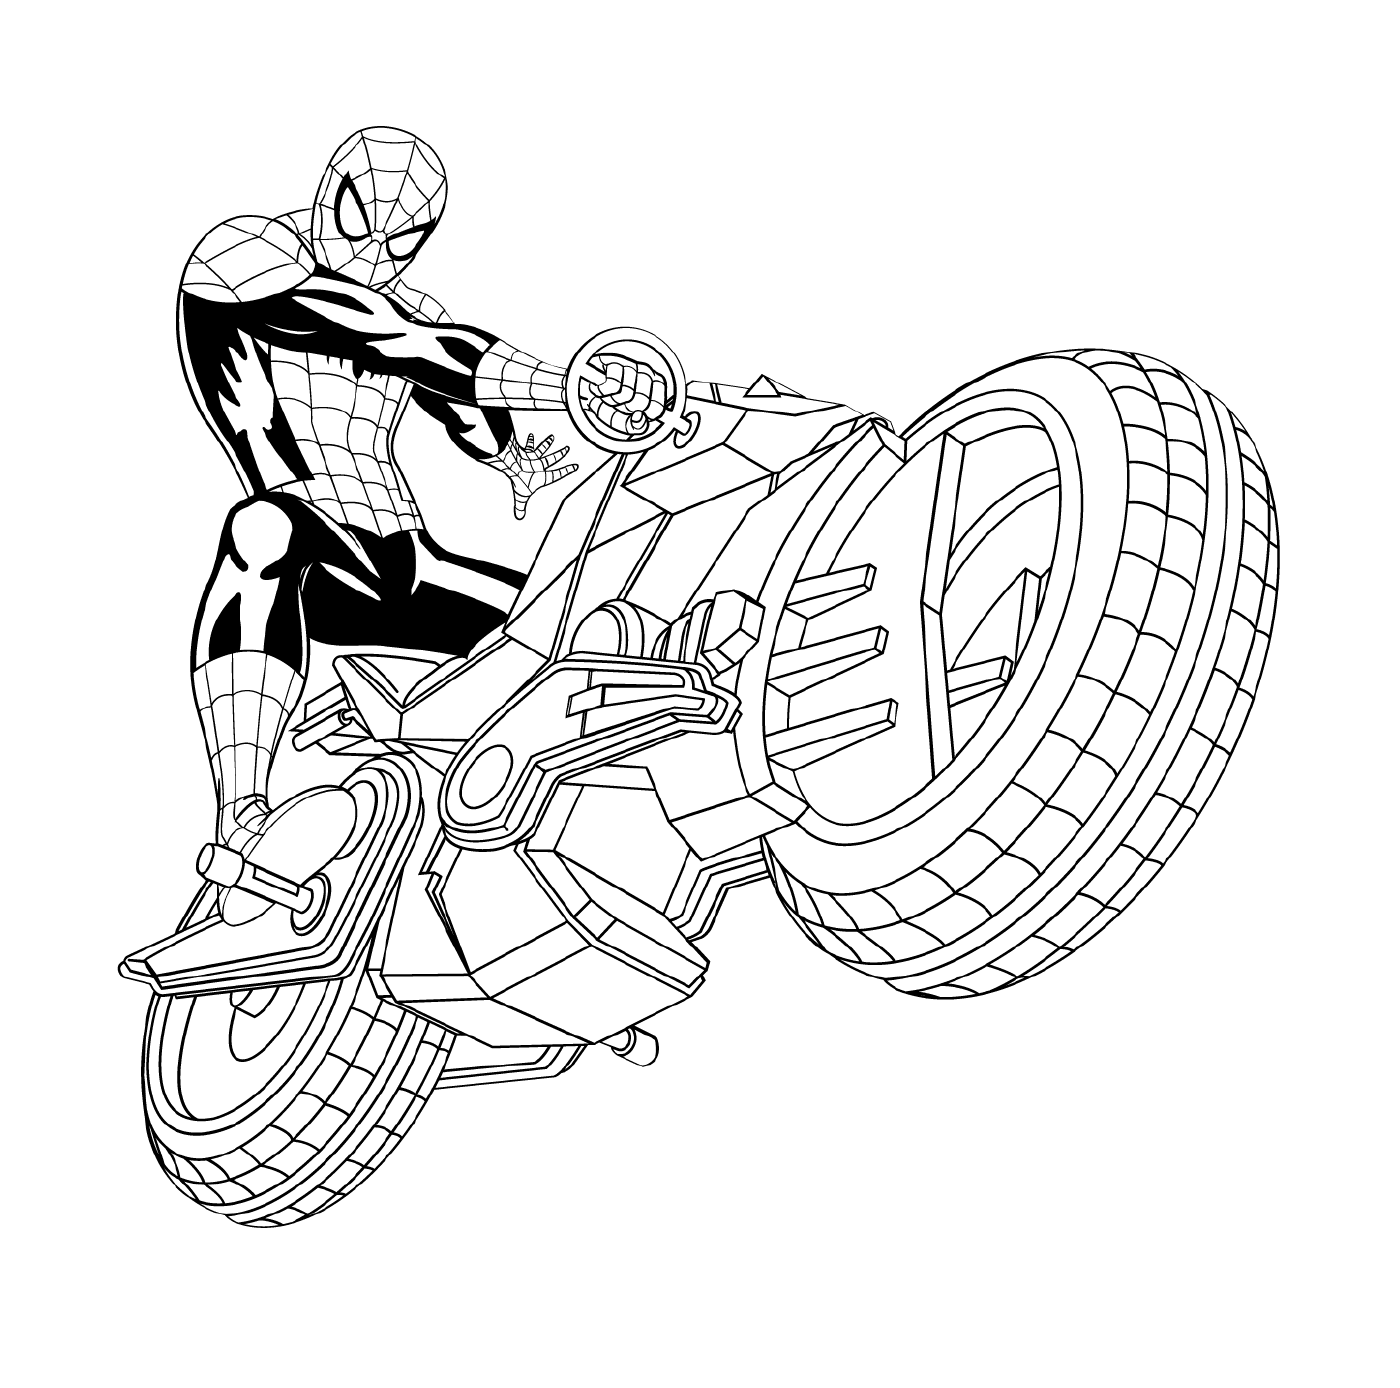  Spider-Man on a fast coloring motorcycle 